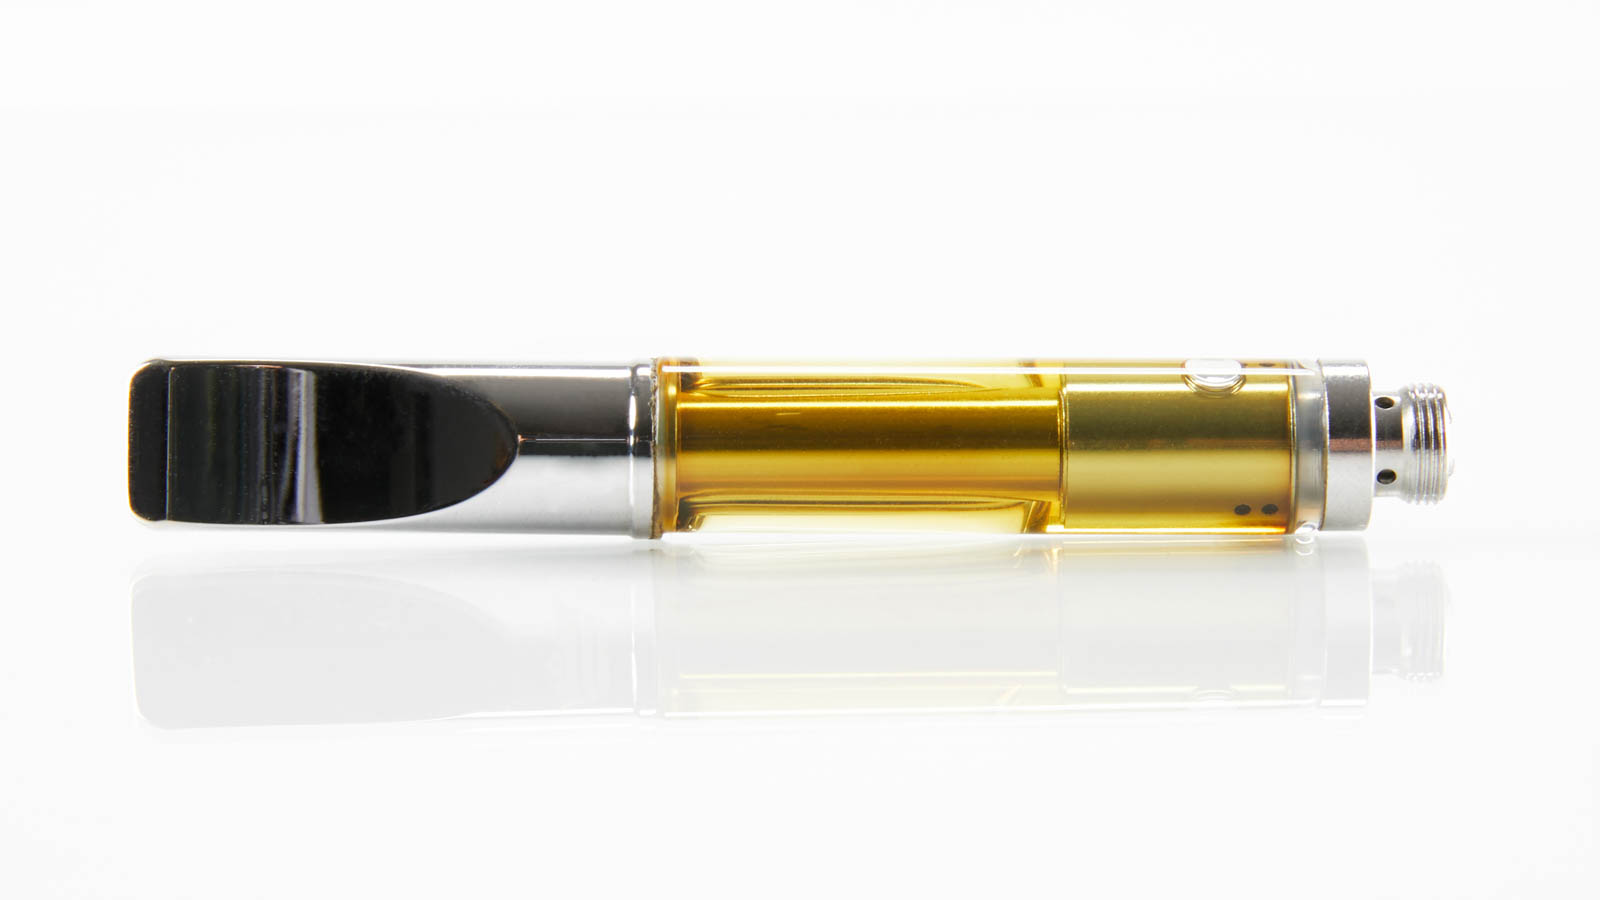 The guide to vaporizing: cartridges vs. concentrates – which one is best for me?